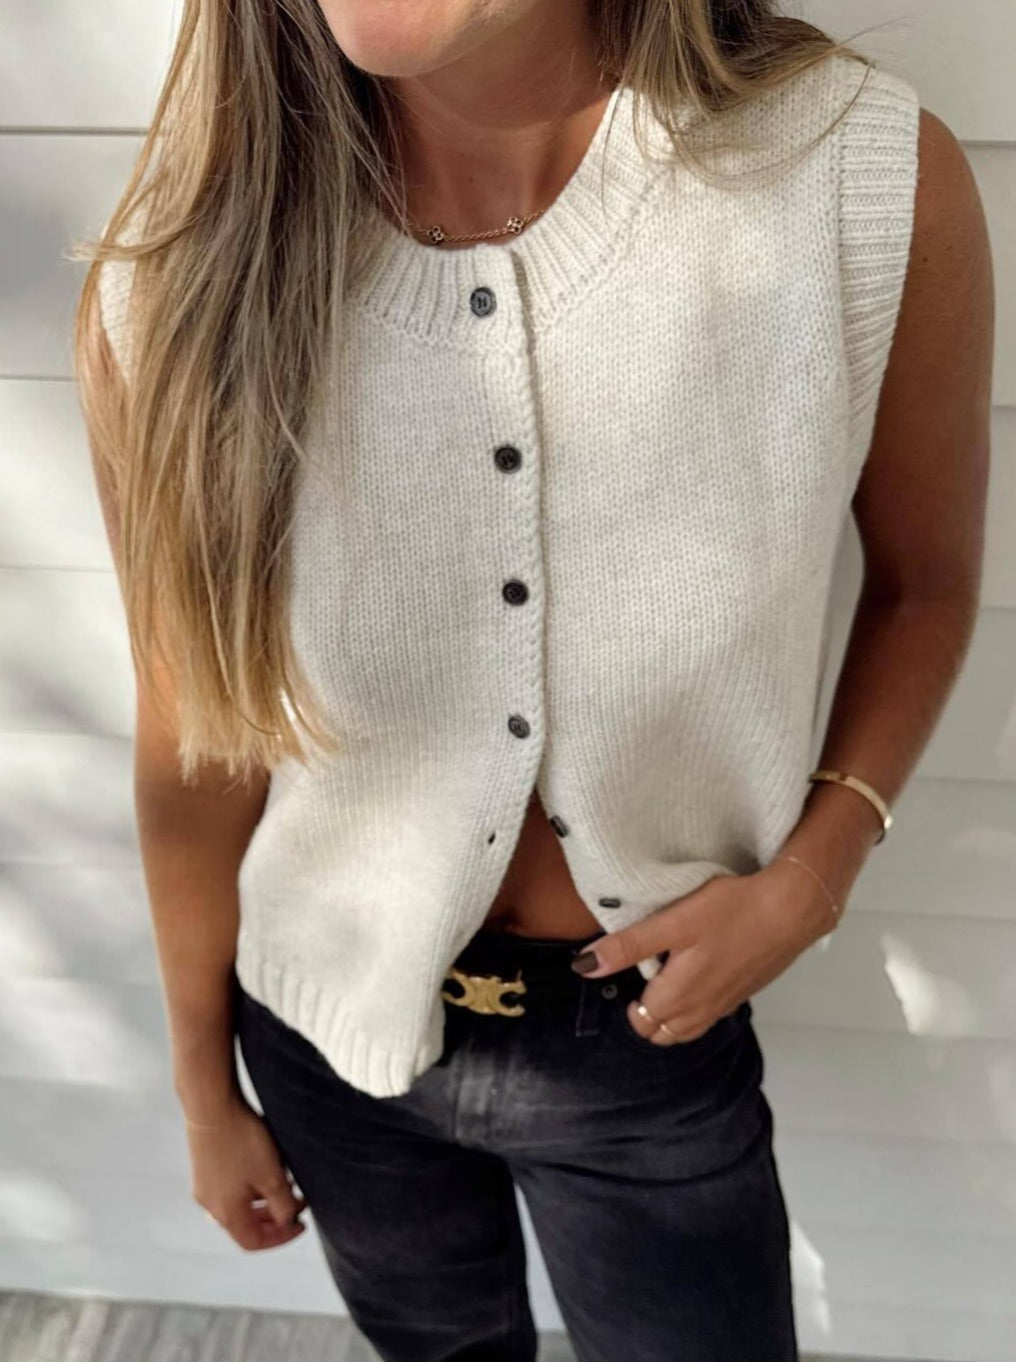 NTG Fad TOP Casual all-match single-breasted cardigan sweater vest